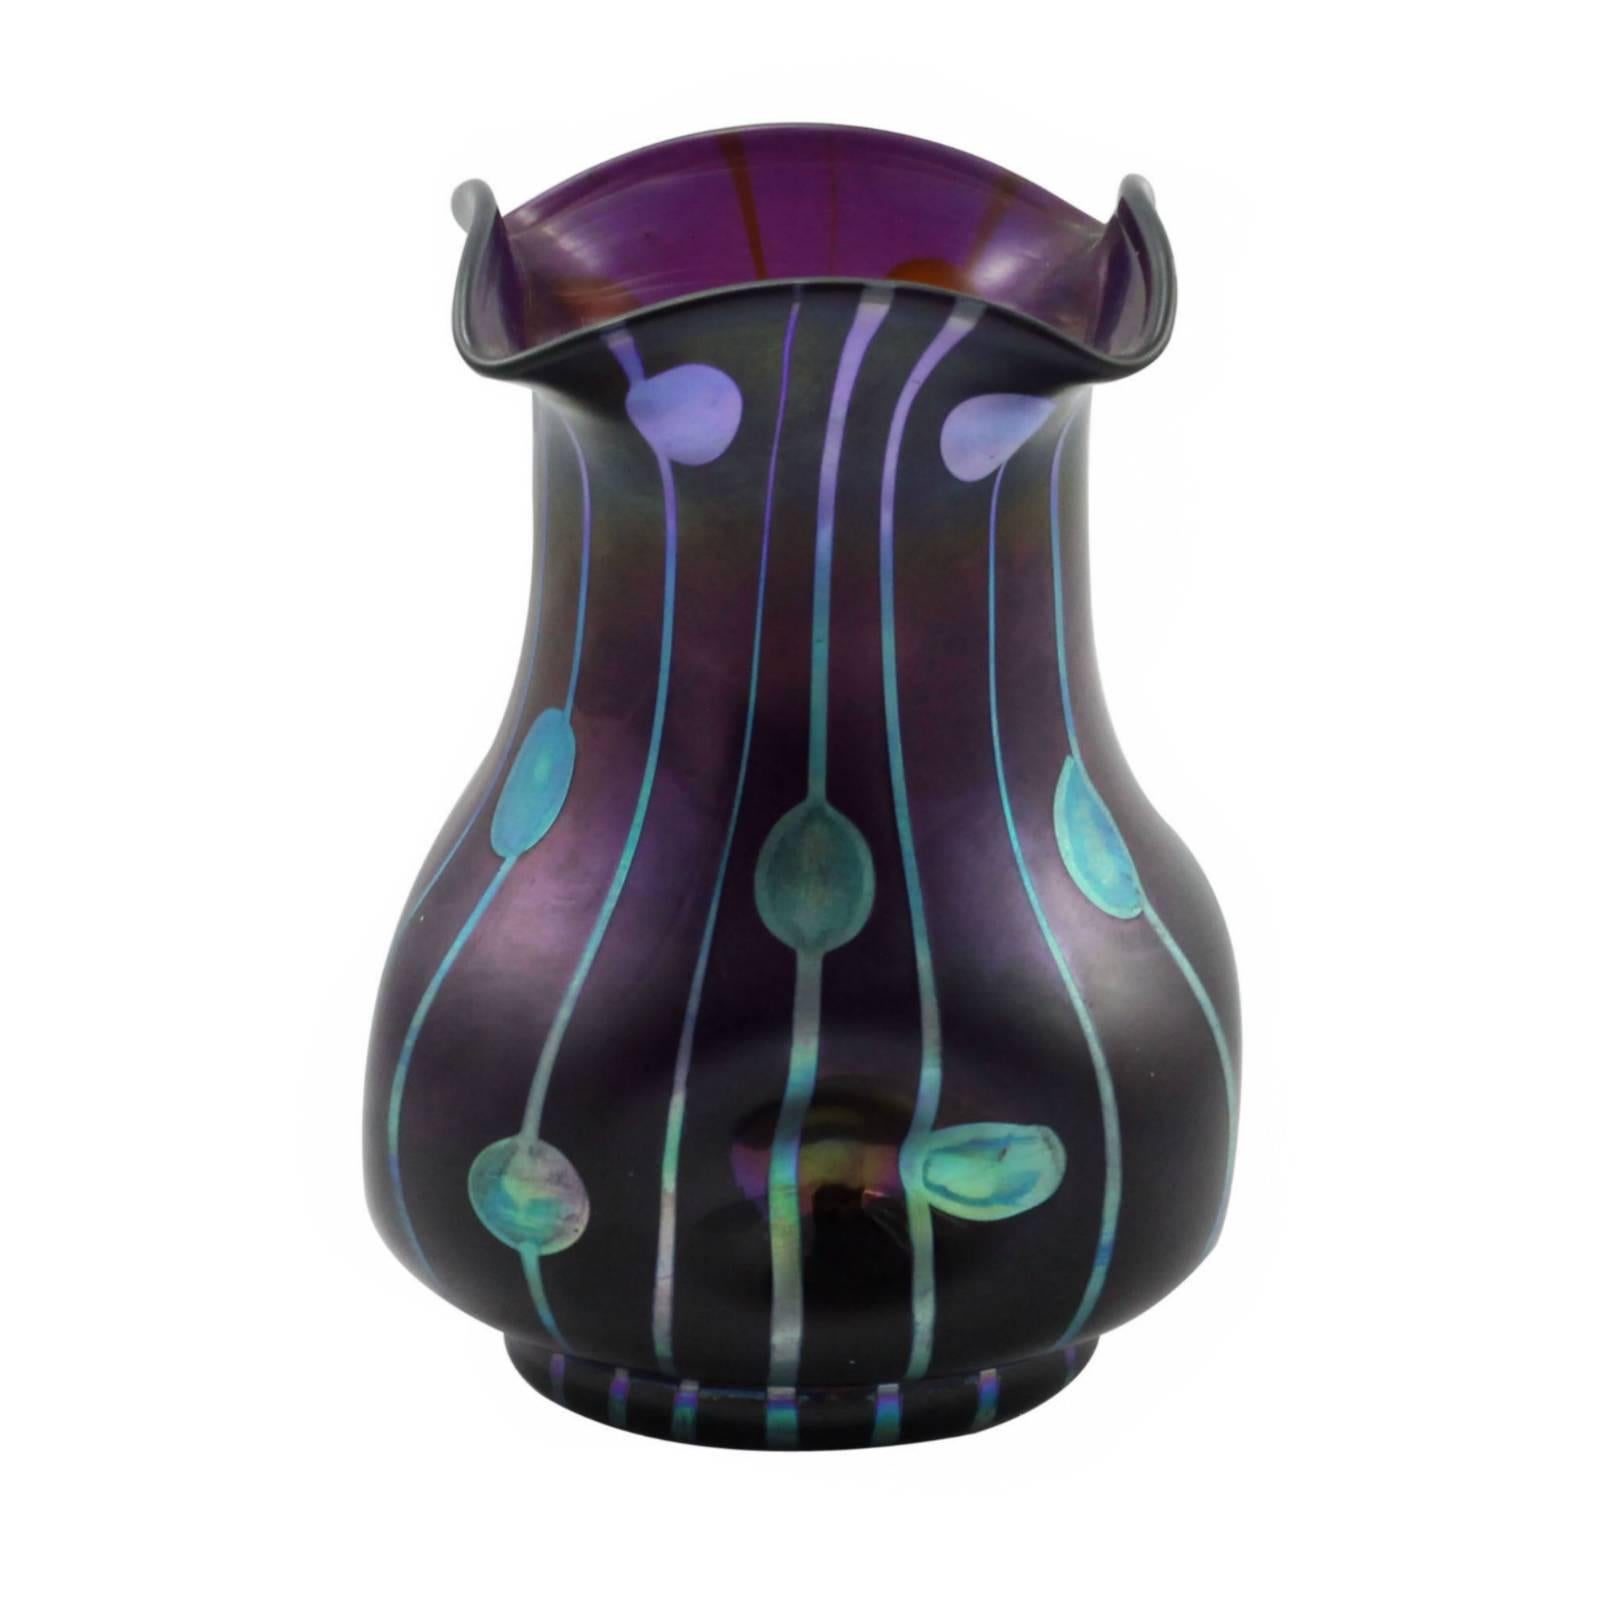 An iridescent glass vase in the 'Streifen und Flecken' decor. The vase features a violet ground with a striped and dotted decor in iridescent blue and silver glaze. It is purported that this vase was designed by Koloman Moser and Josef Hoffmann for